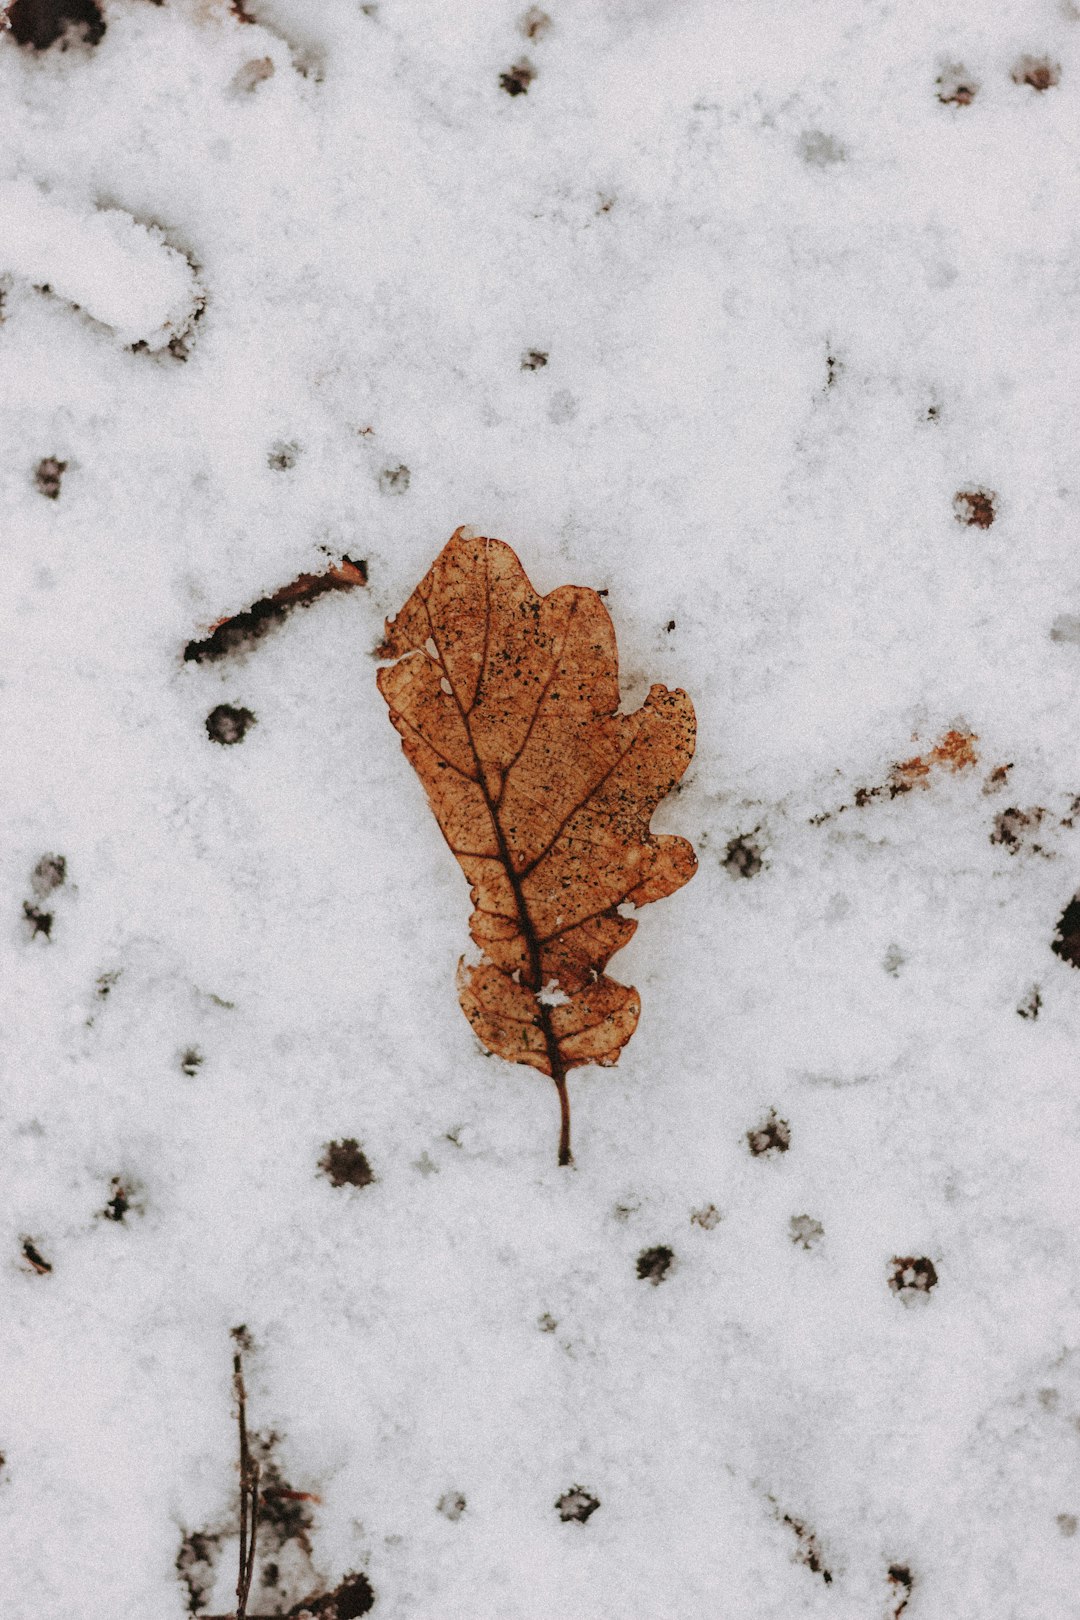 brown dried leaf on snow covered ground